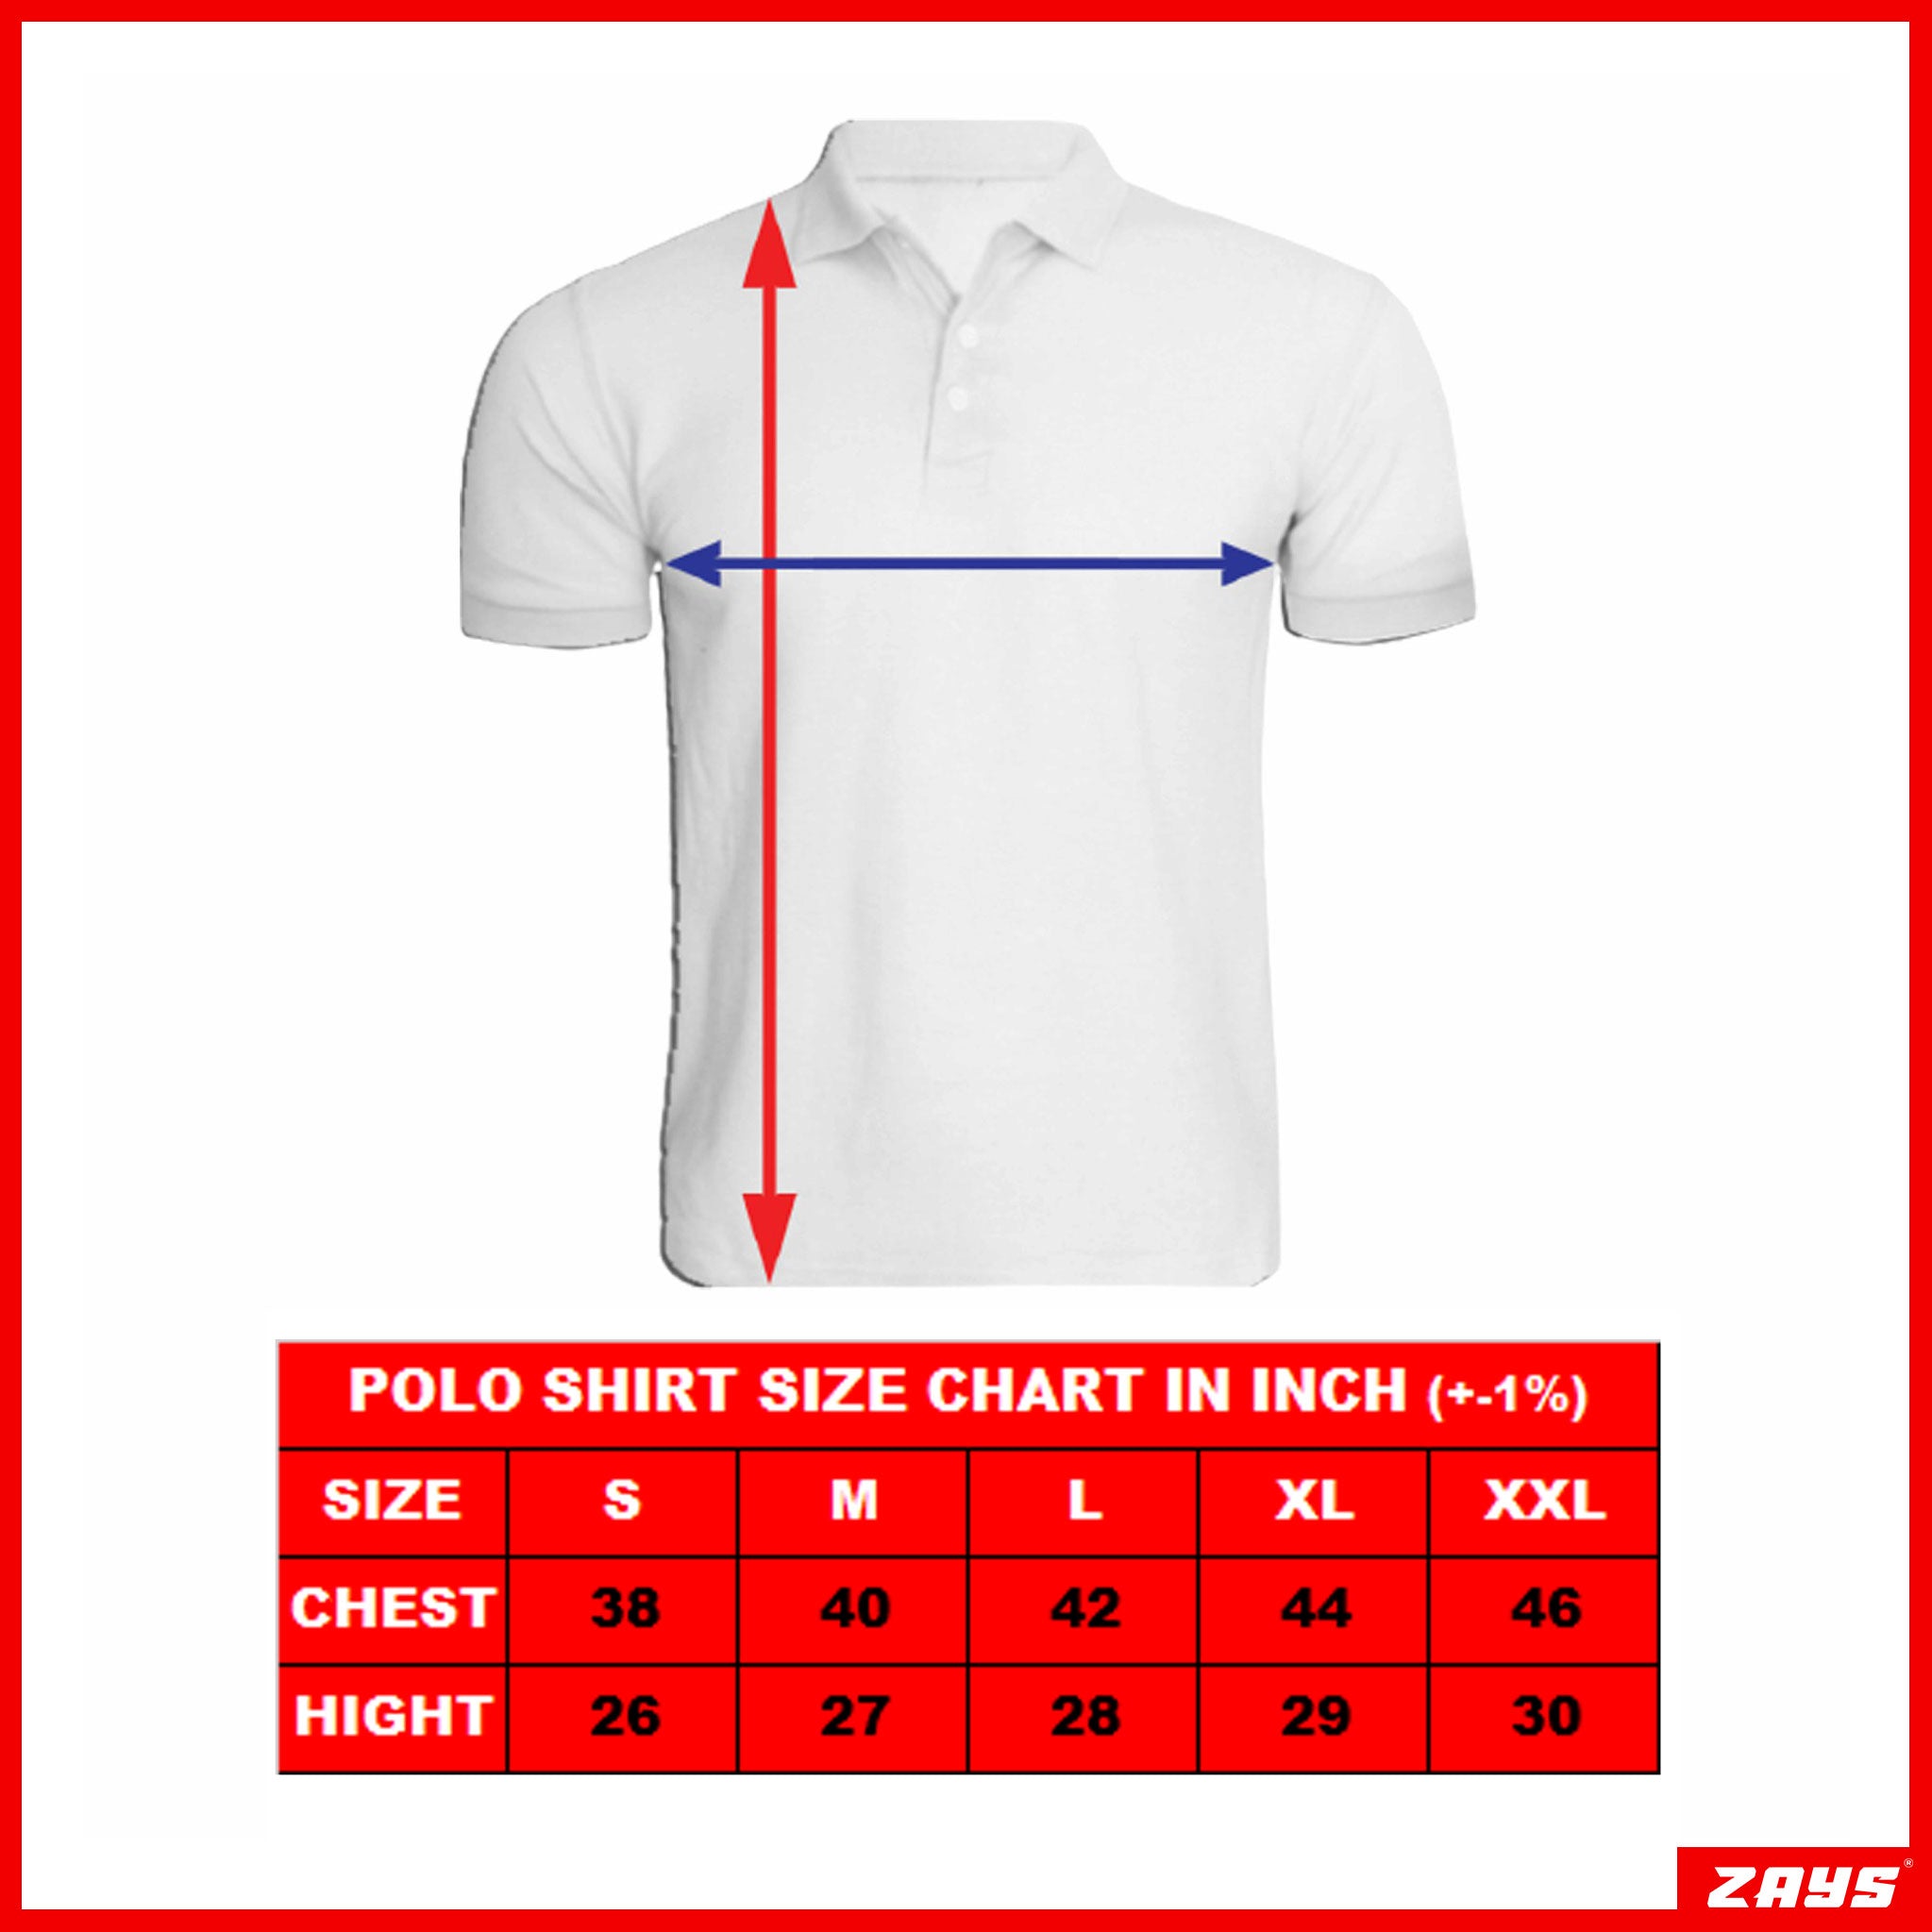 Imported Super Premium Cotton Polo Shirt For Men (ZAYSIPS07) - Blue